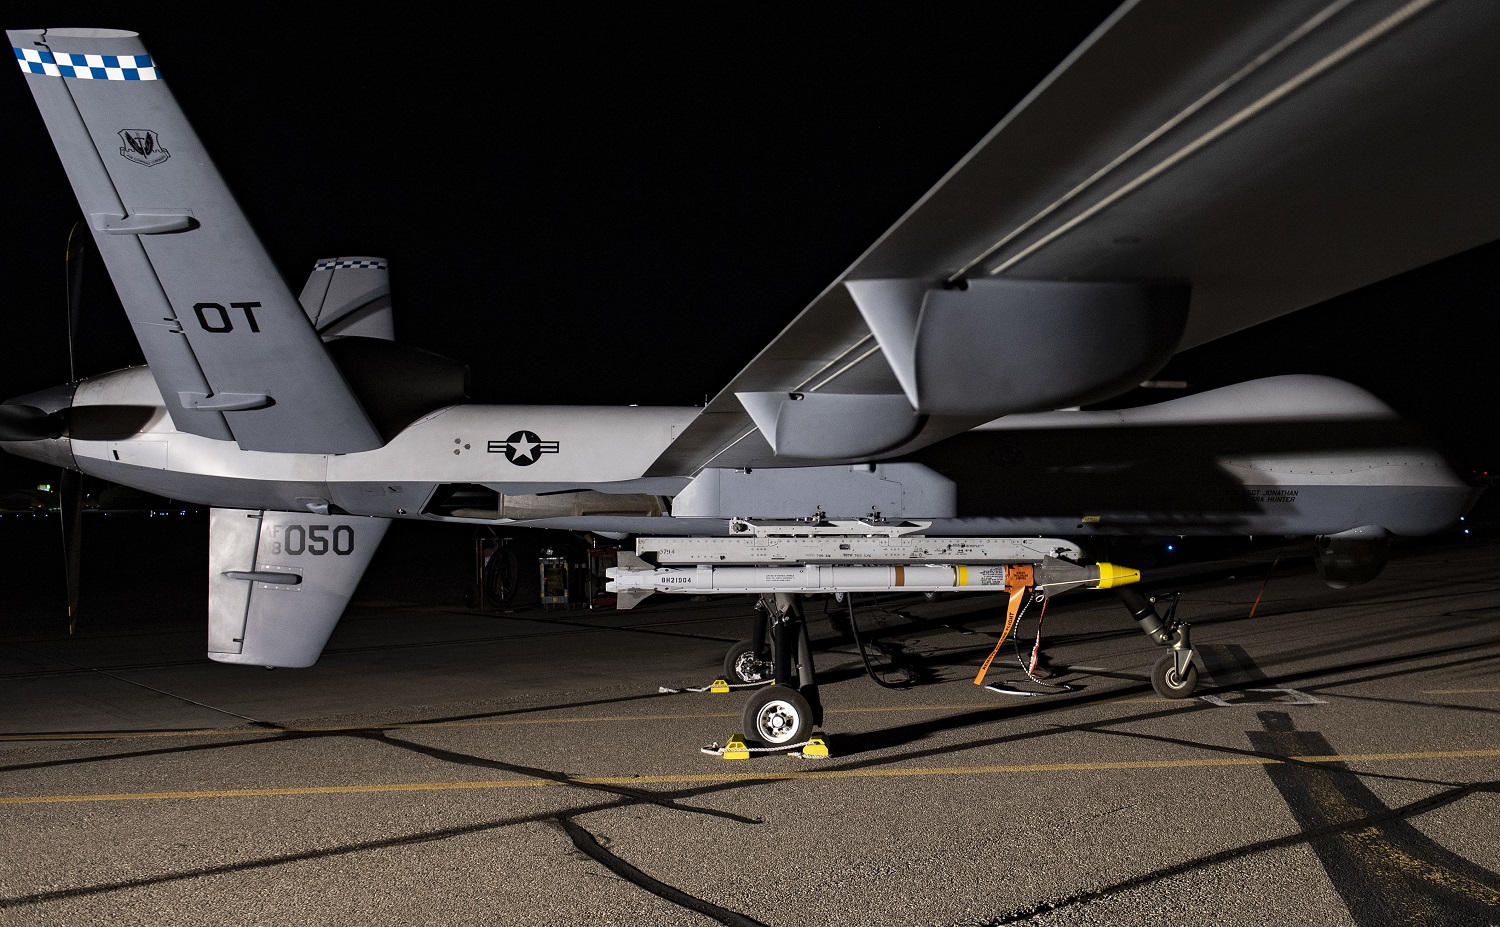 In the test, the MQ-9 successfully employed a live air-to-air AIM-9X Block 2 missile against a target BQM-167 drone simulating a cruise missile. 